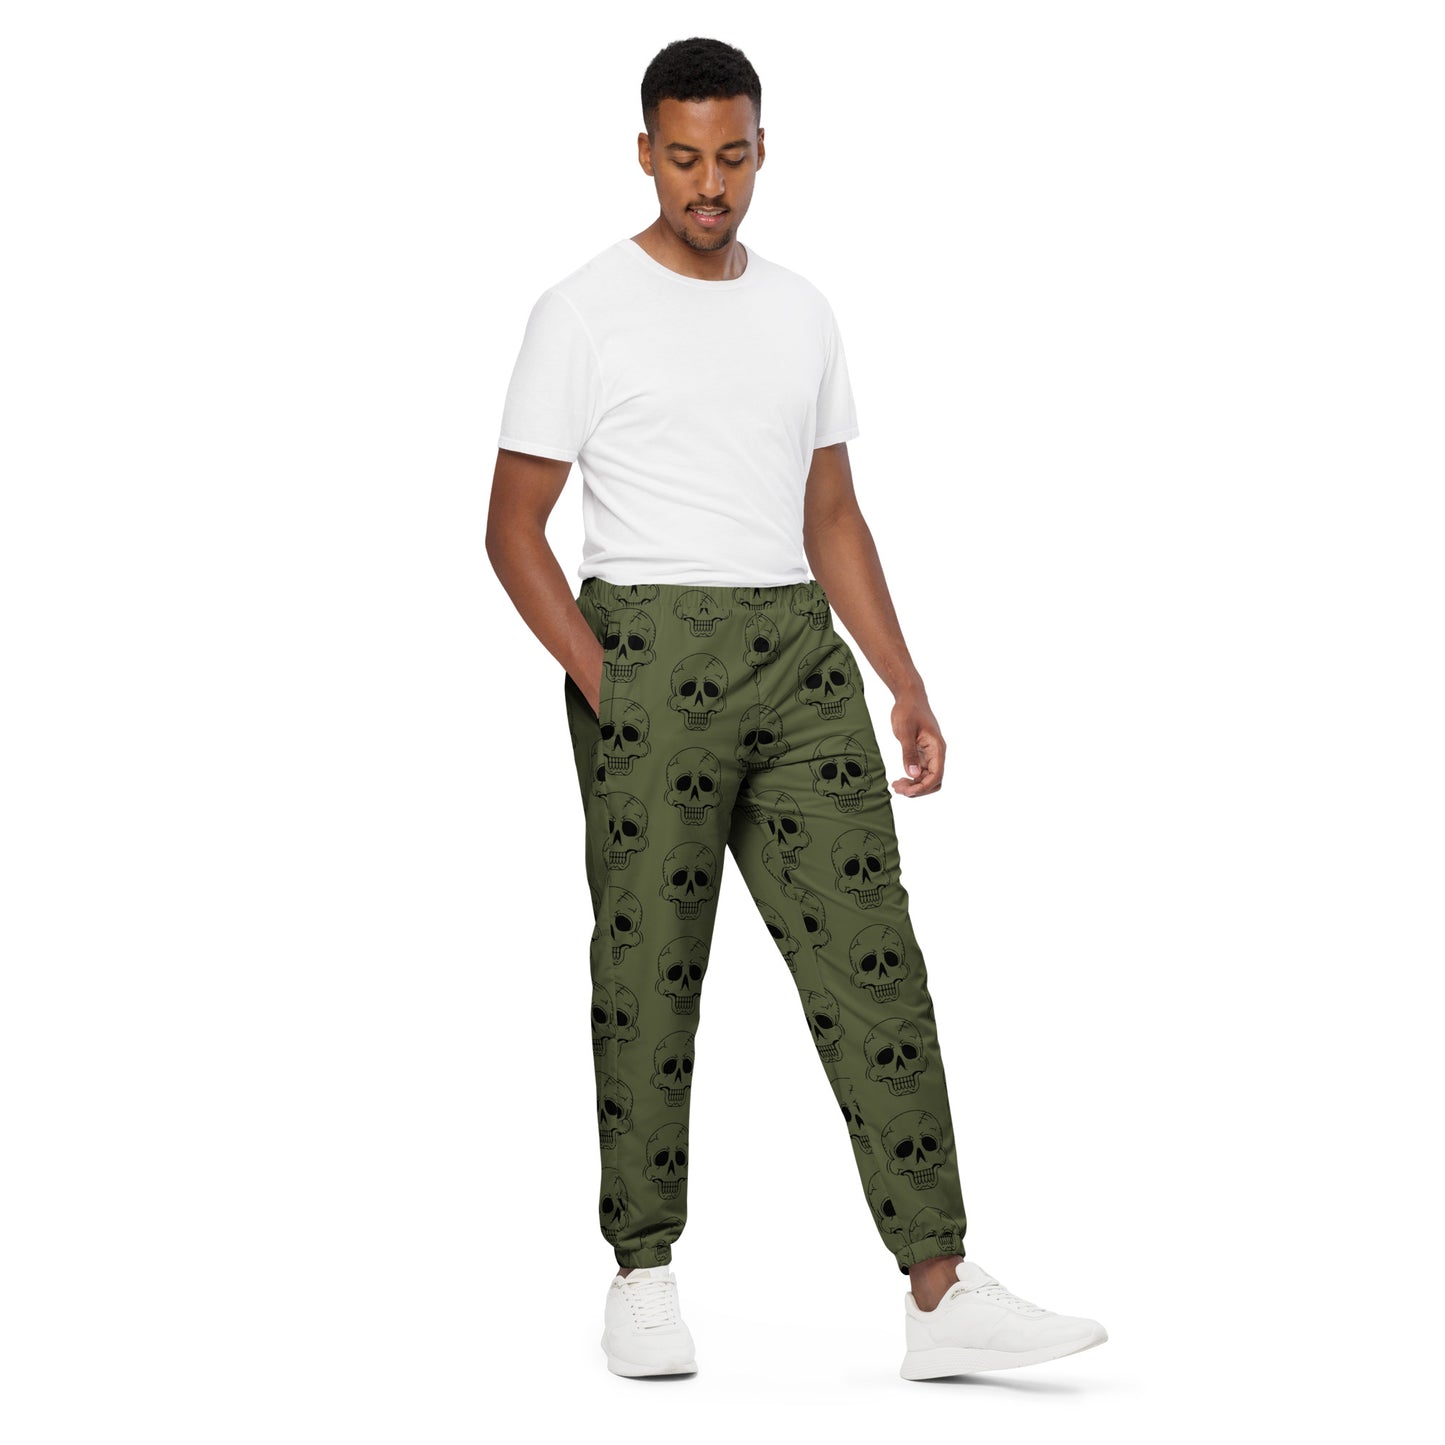 GREEN LAUGHING SKULL TRACK PANTS